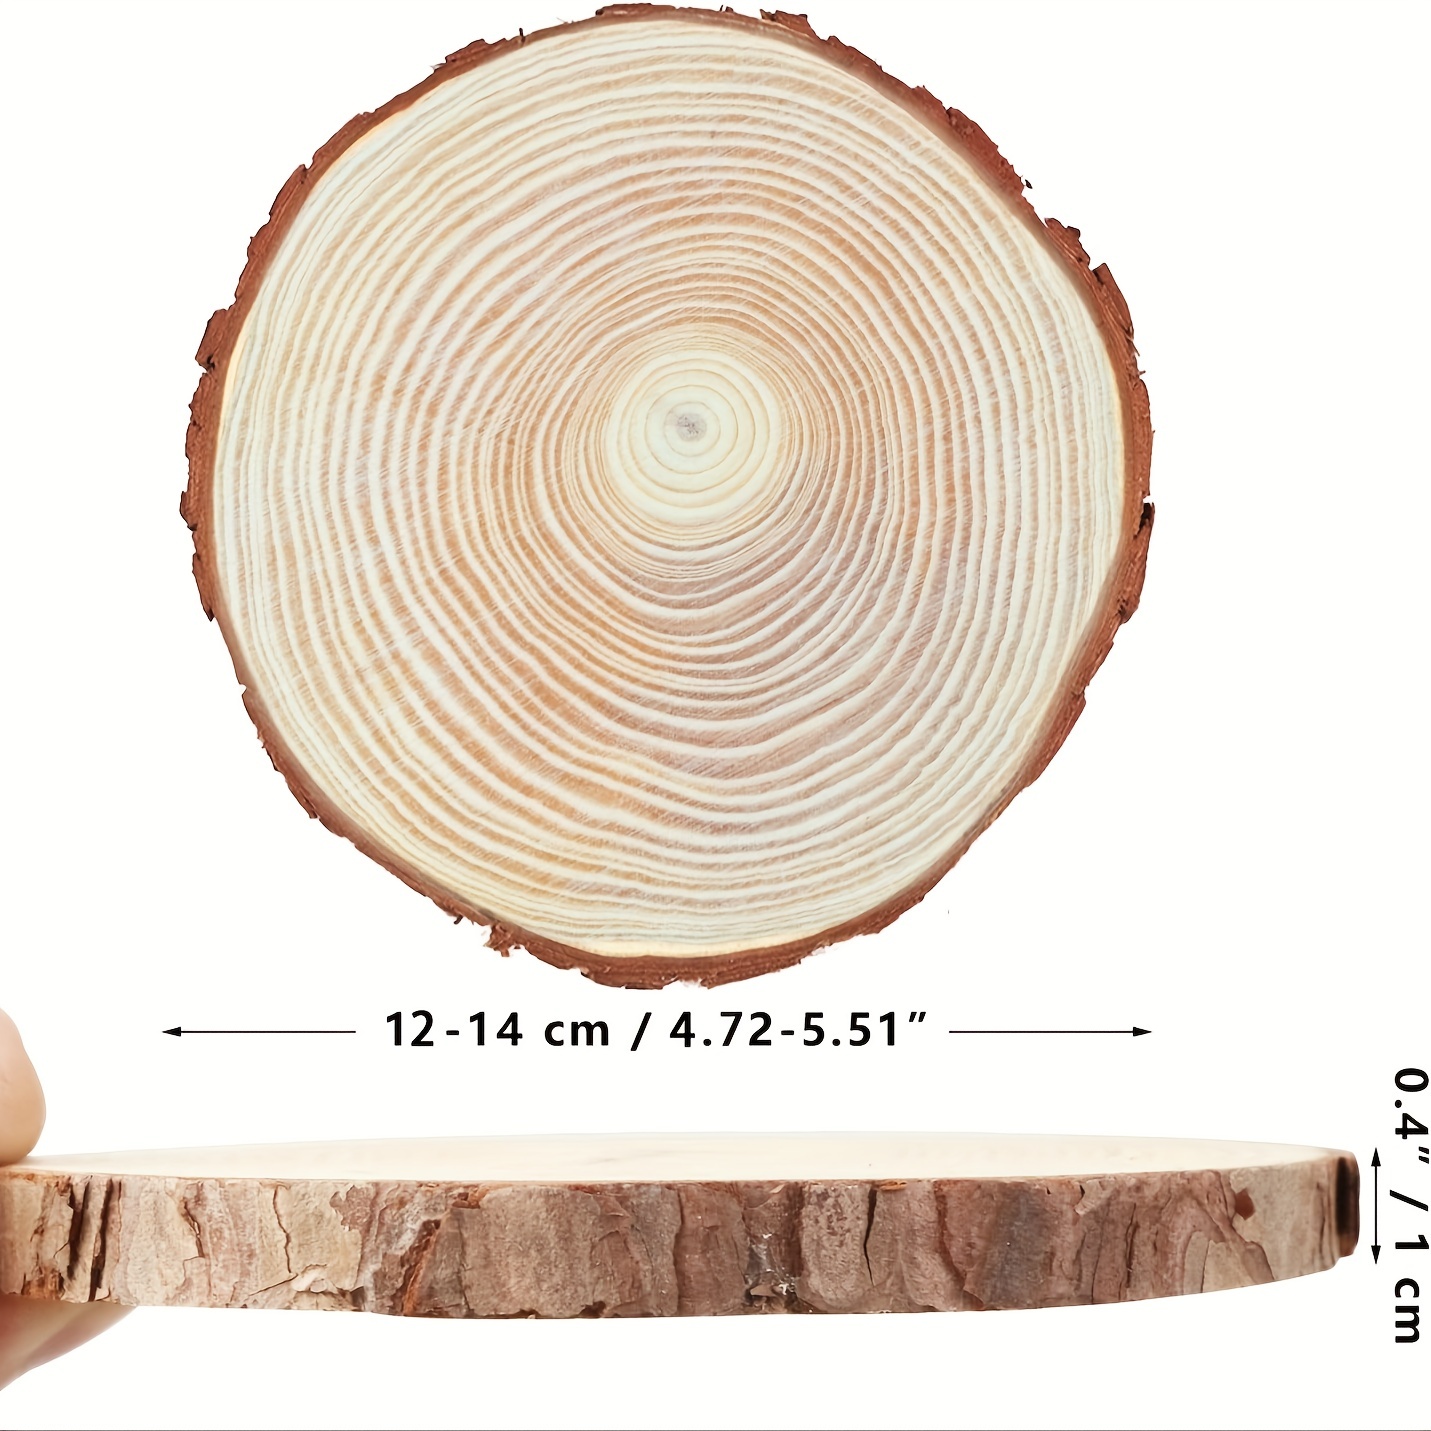 12 Round Natural Wood Slices for Ornaments and Other Crafts